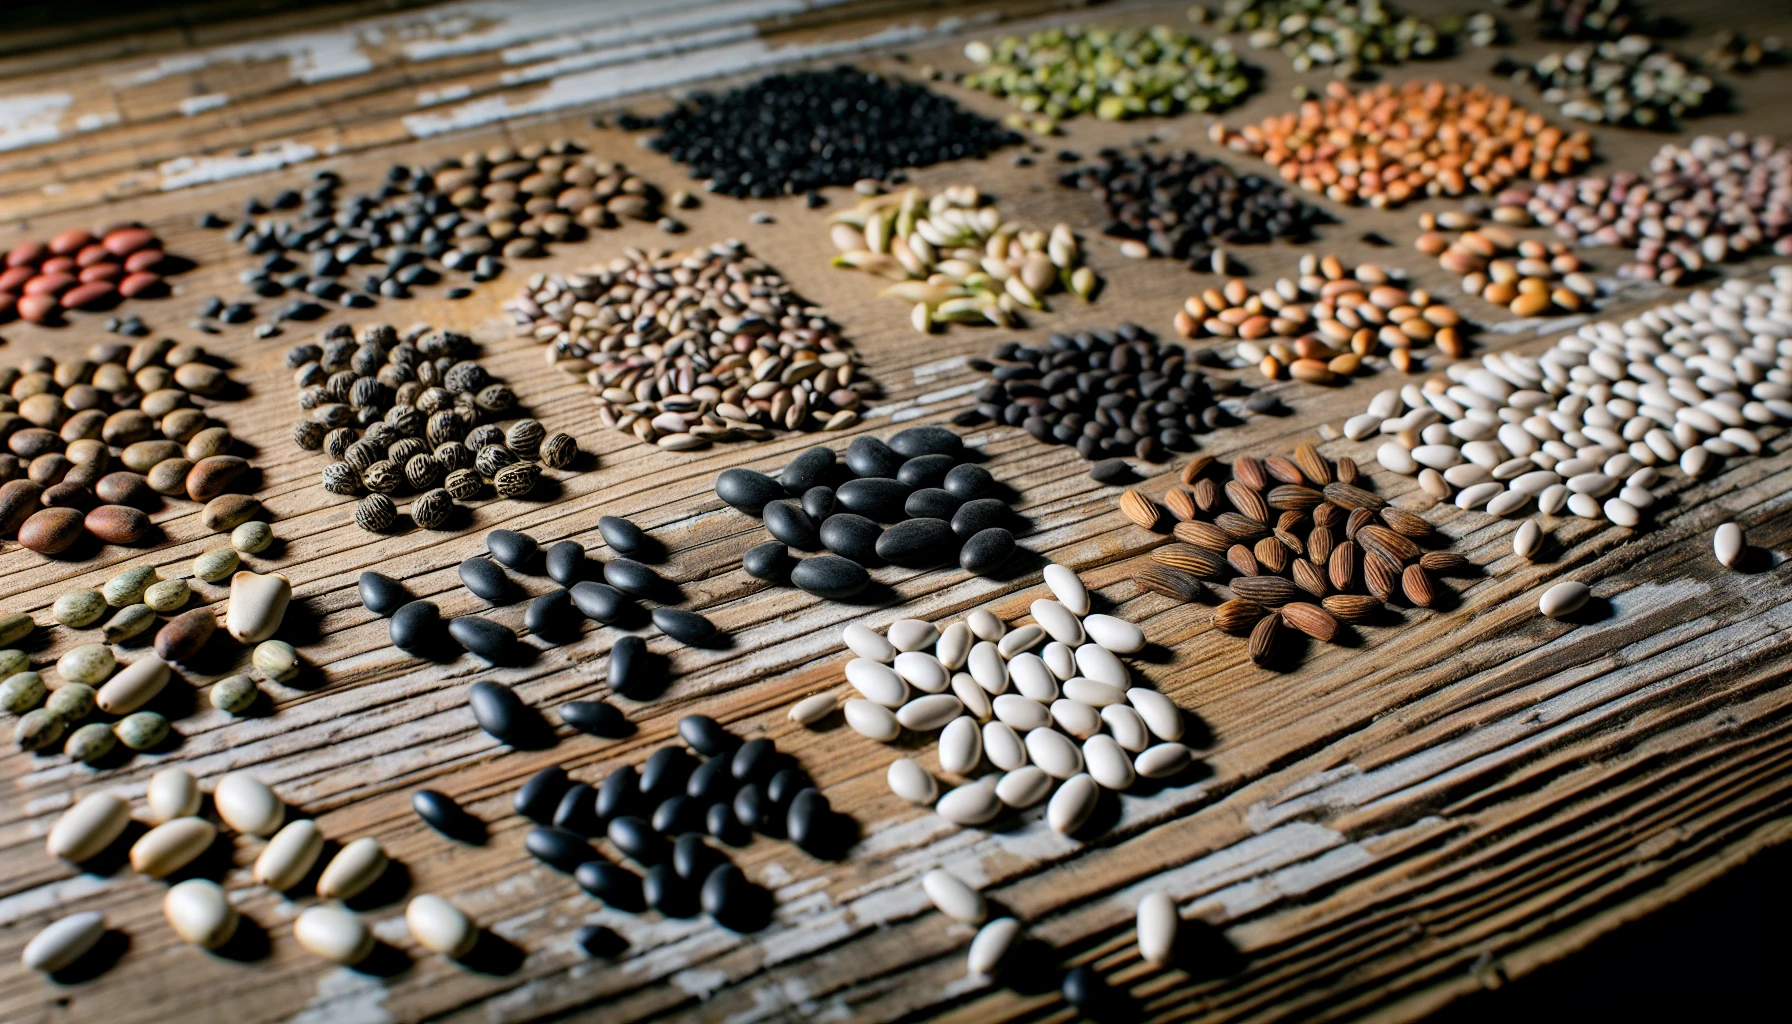 A variety of non-GMO heirloom vegetable seeds and medicinal herb seeds for a survival garden